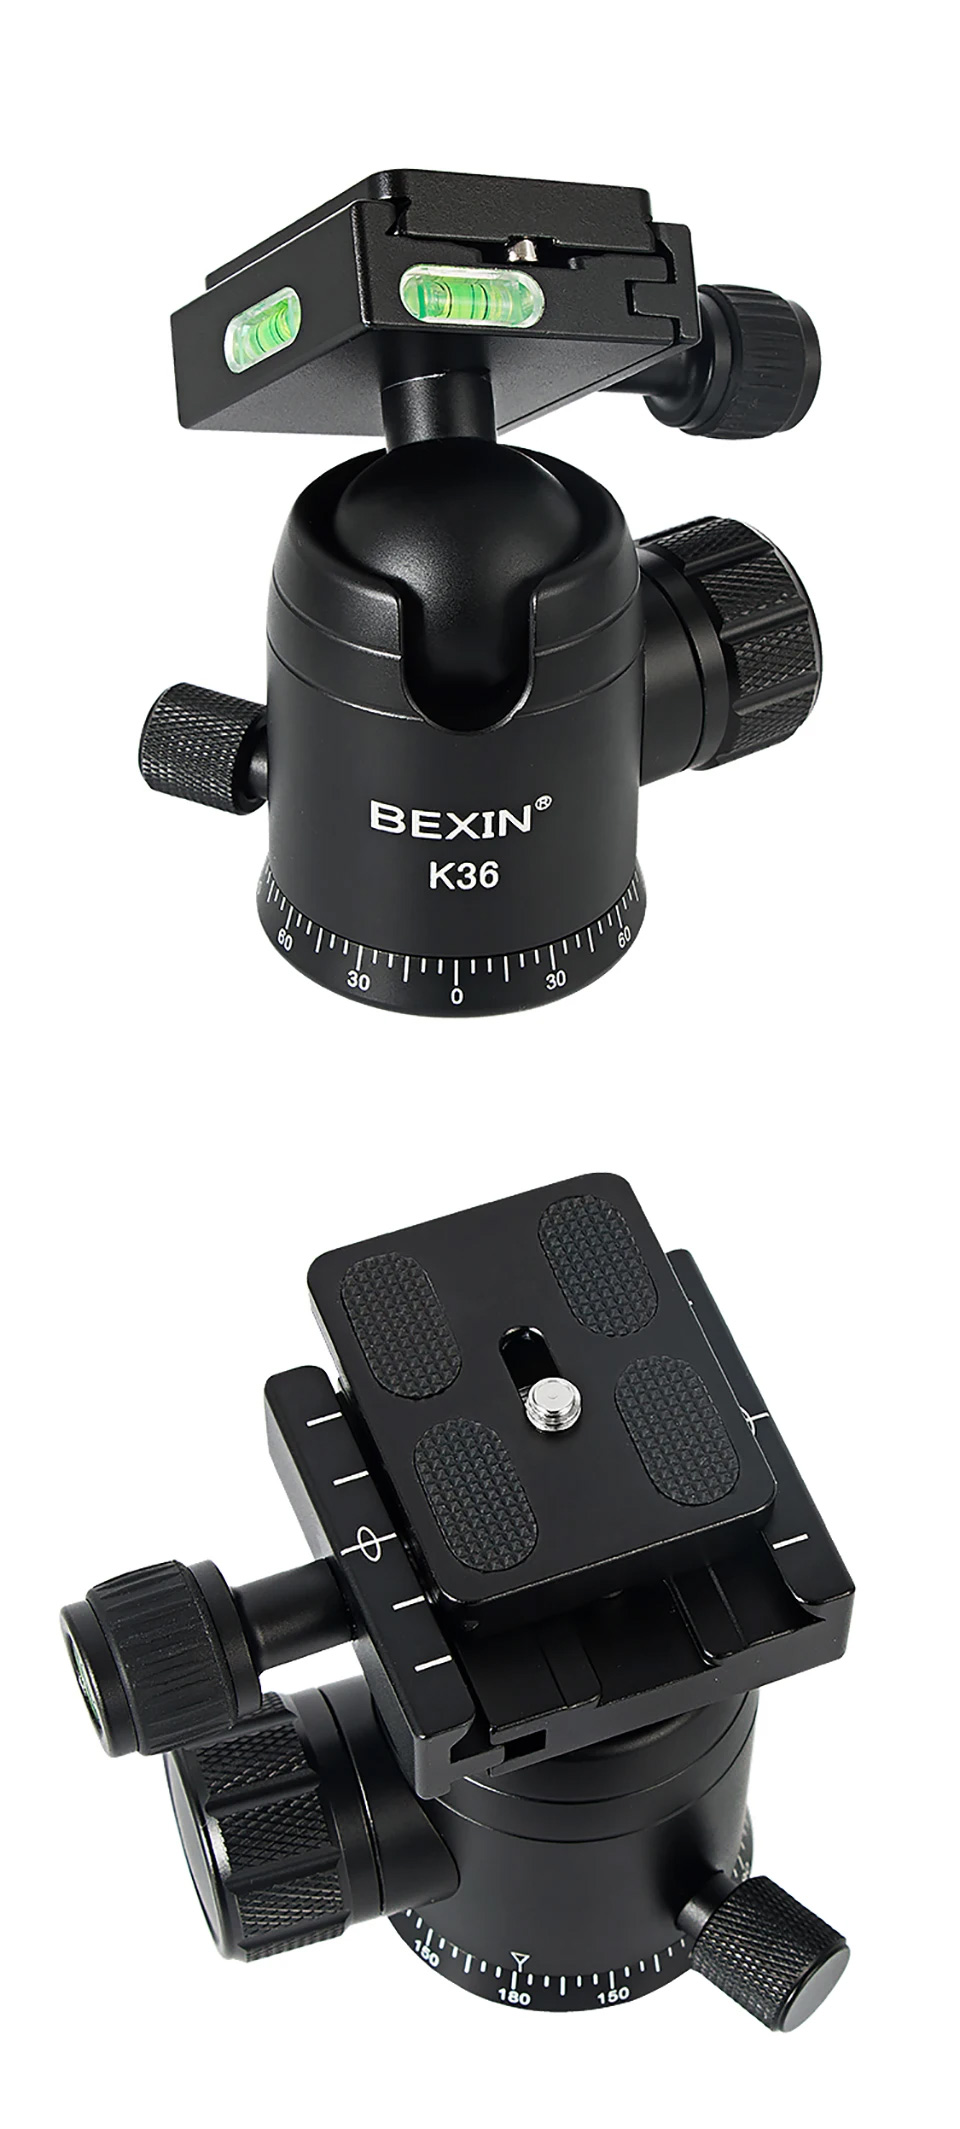 BEXIN K36 Panoramic Ball Head 360 Degree Rotation with Damping for SLR Camera (3)n8b